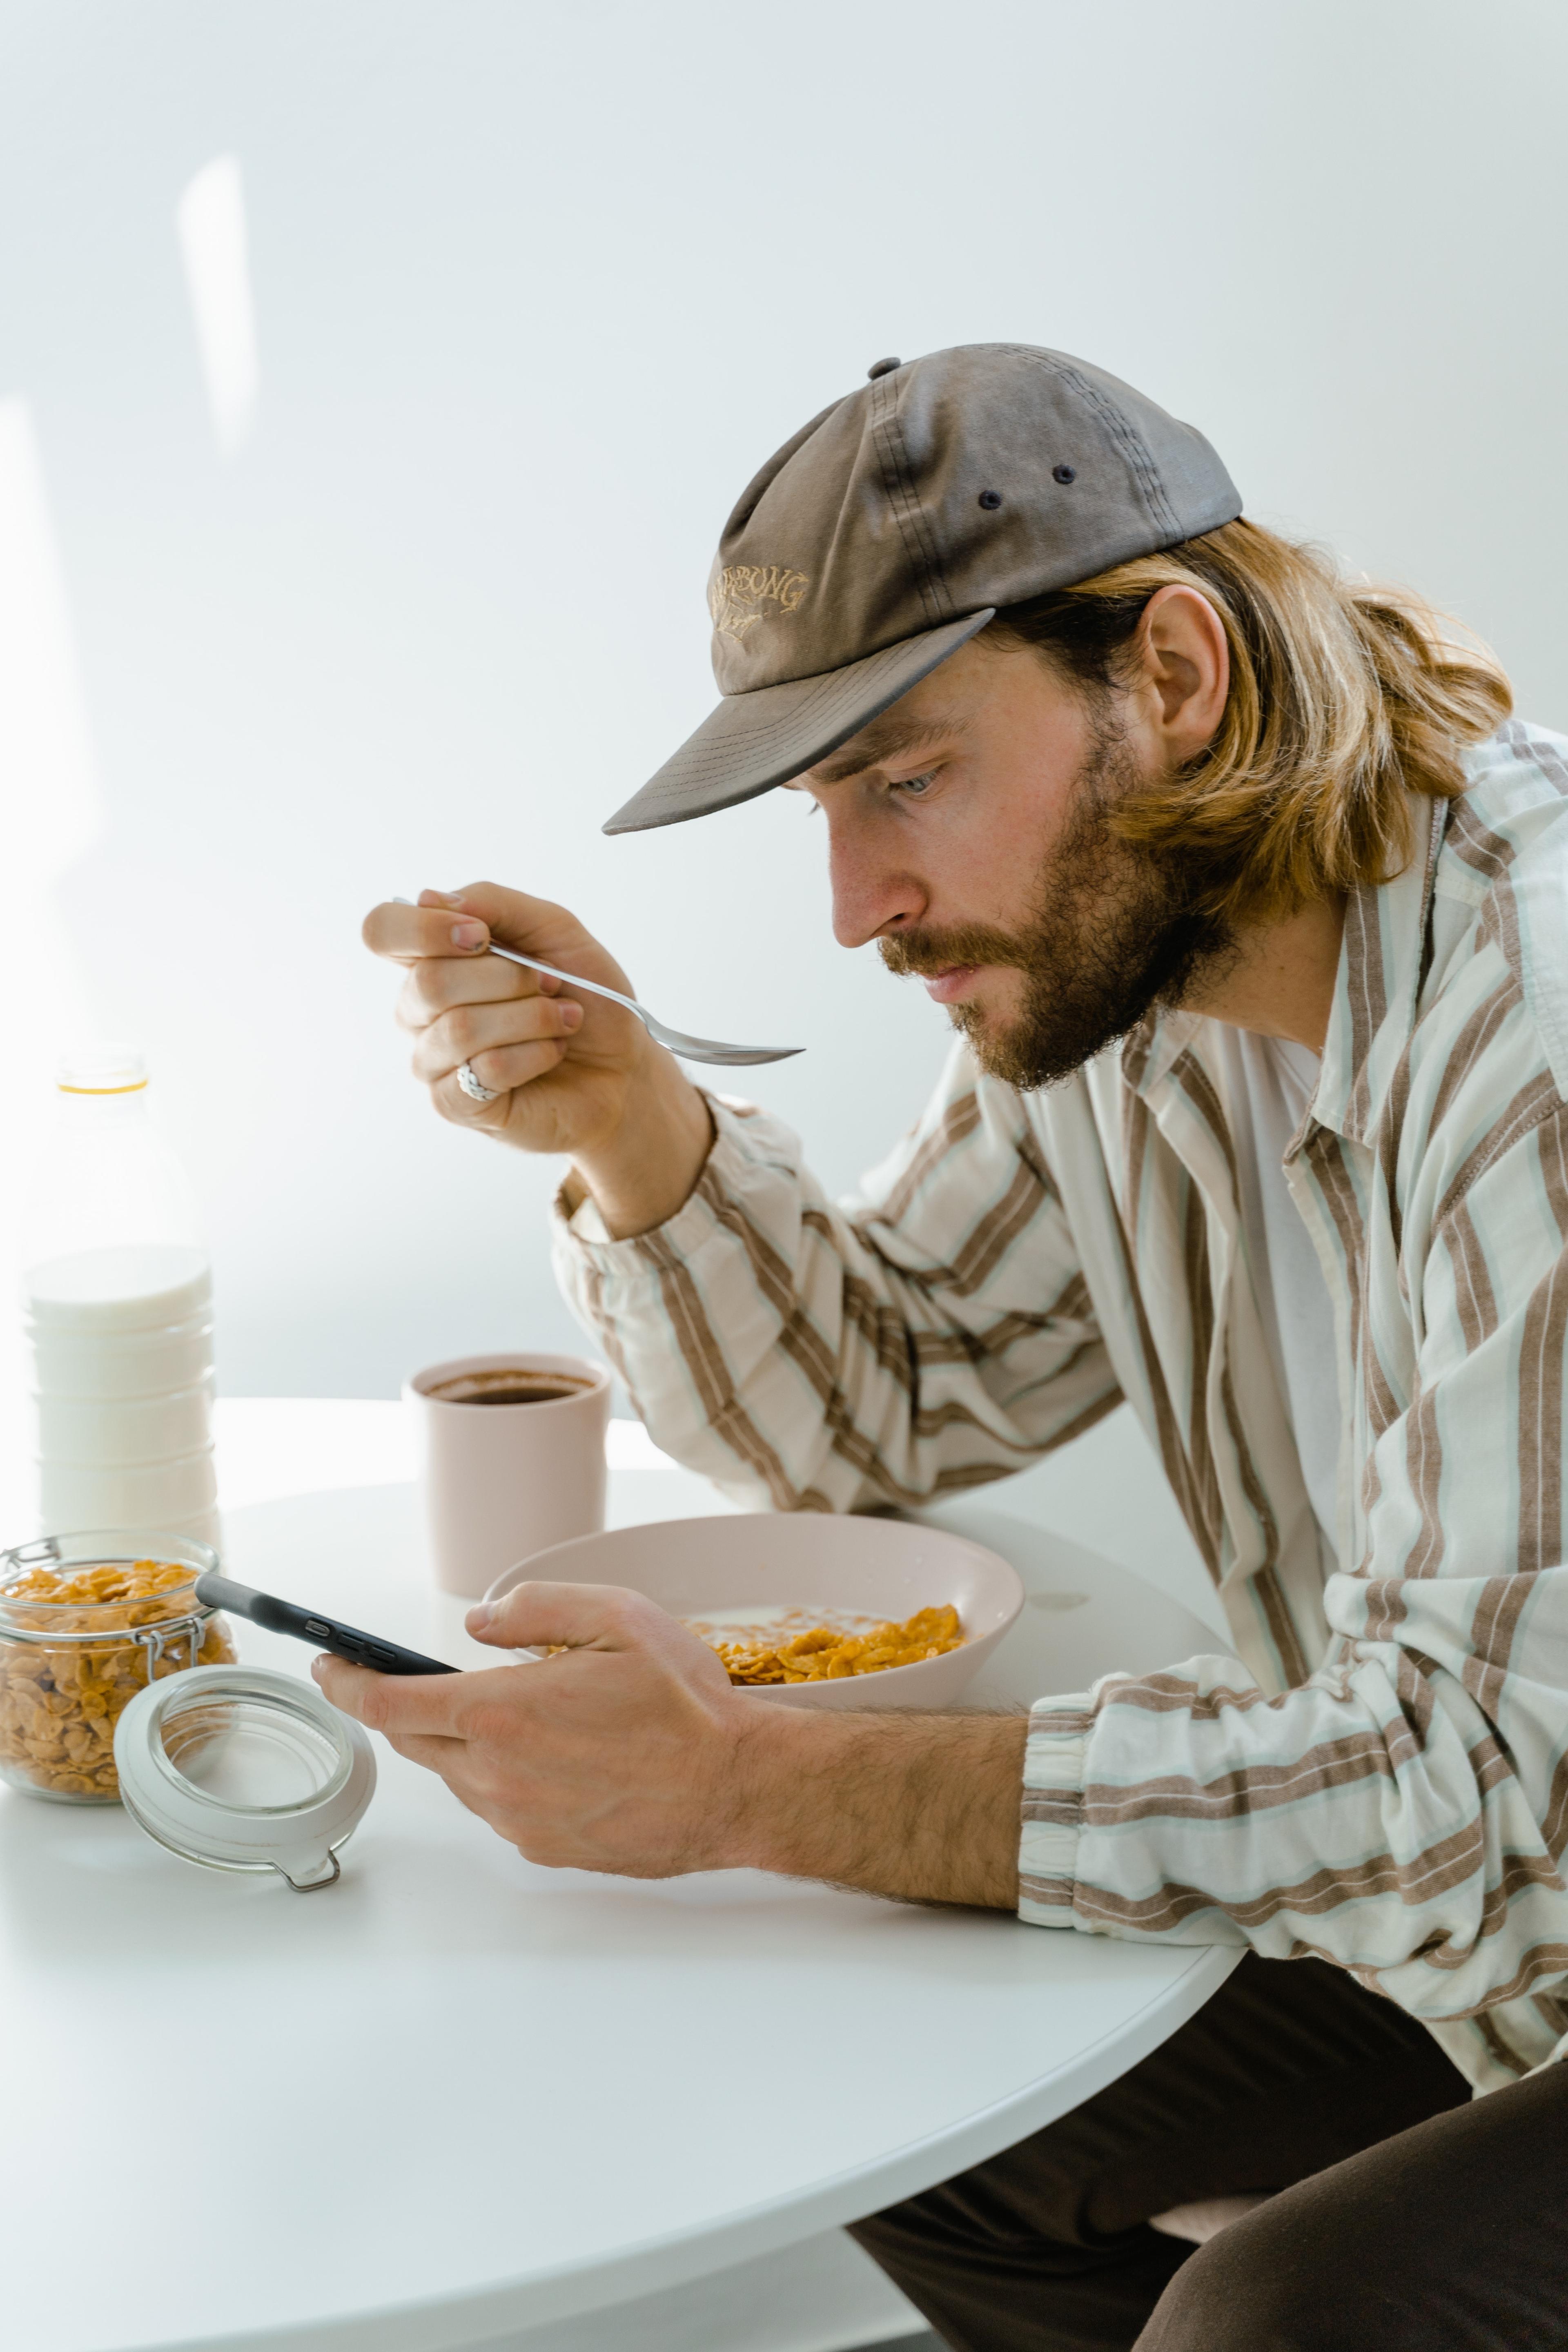 Man sitting on his phone eating cereal